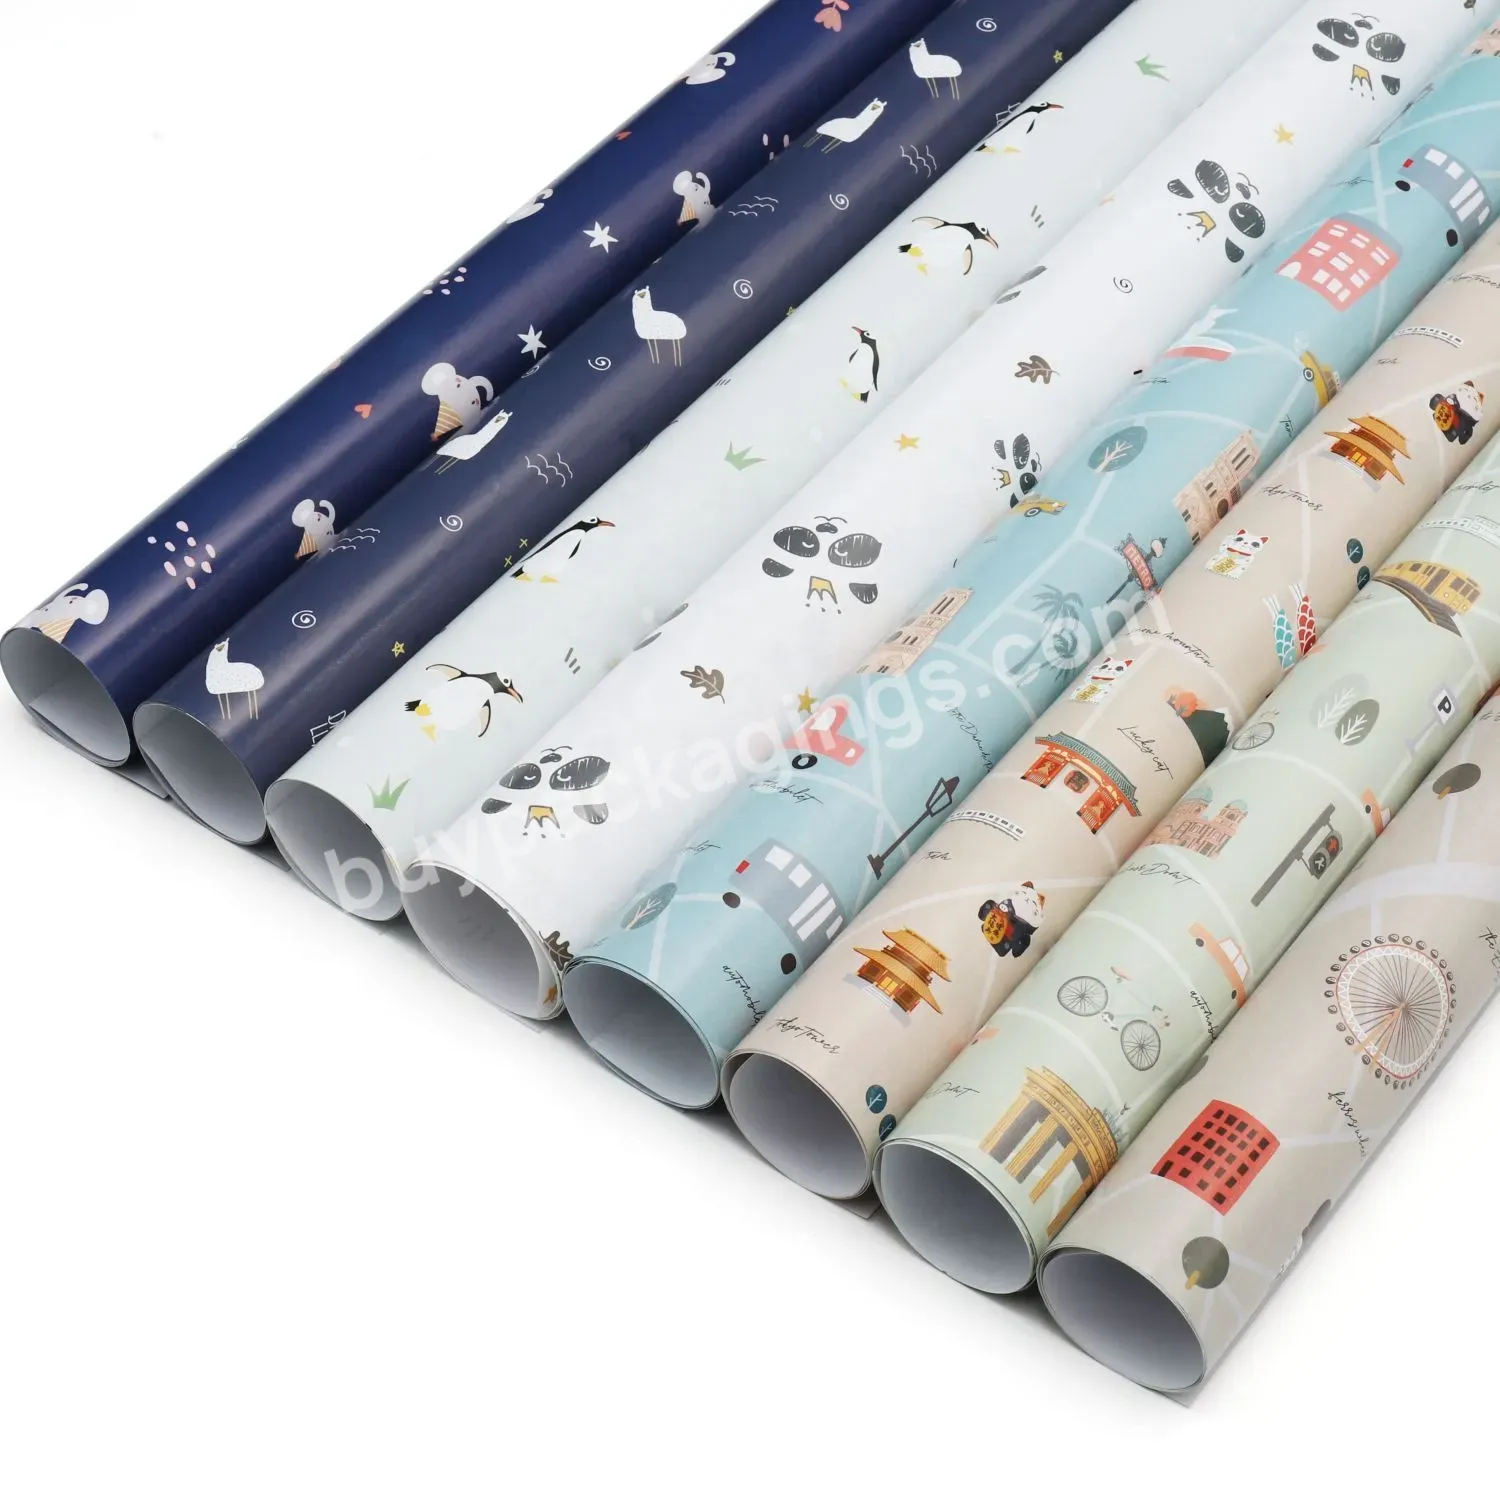 Kids Birthday Wrapping Paper Collection - Buy Kids Birthday Wrapping Paper,Wrapping Paper Collection,Wrapping Paper.